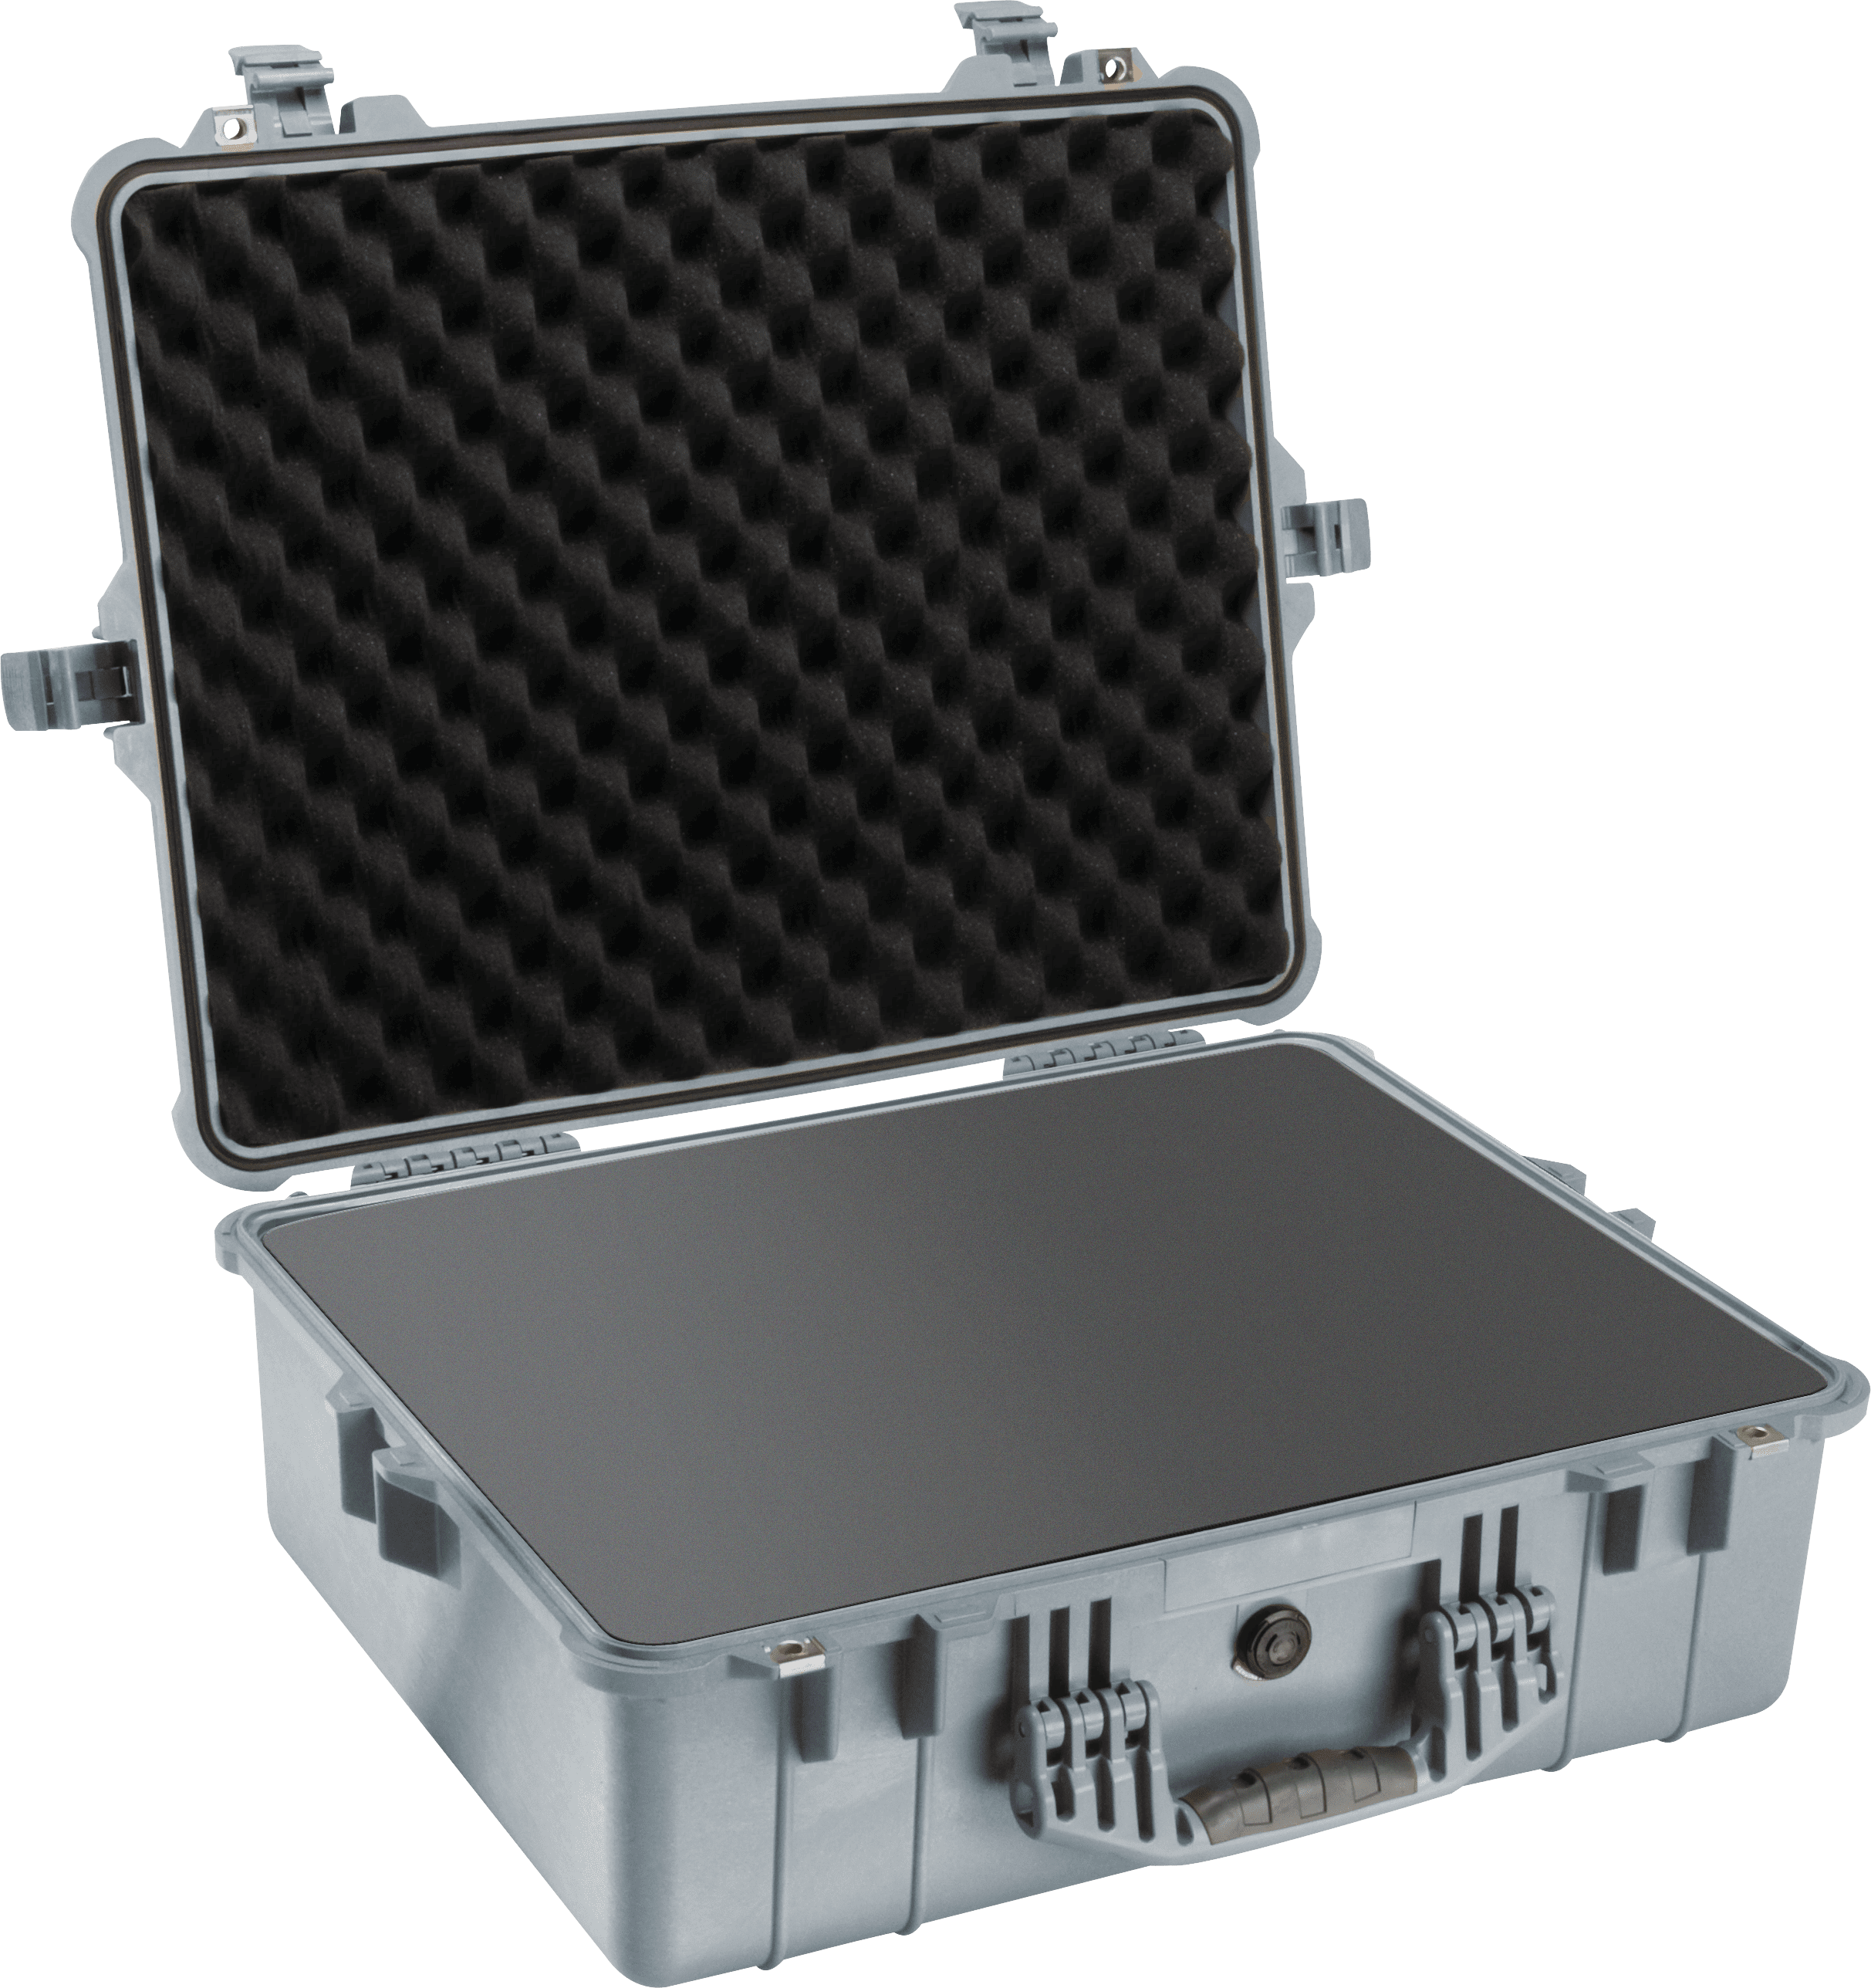 Pelican Products 1600 Protector Case - Silver, Foam